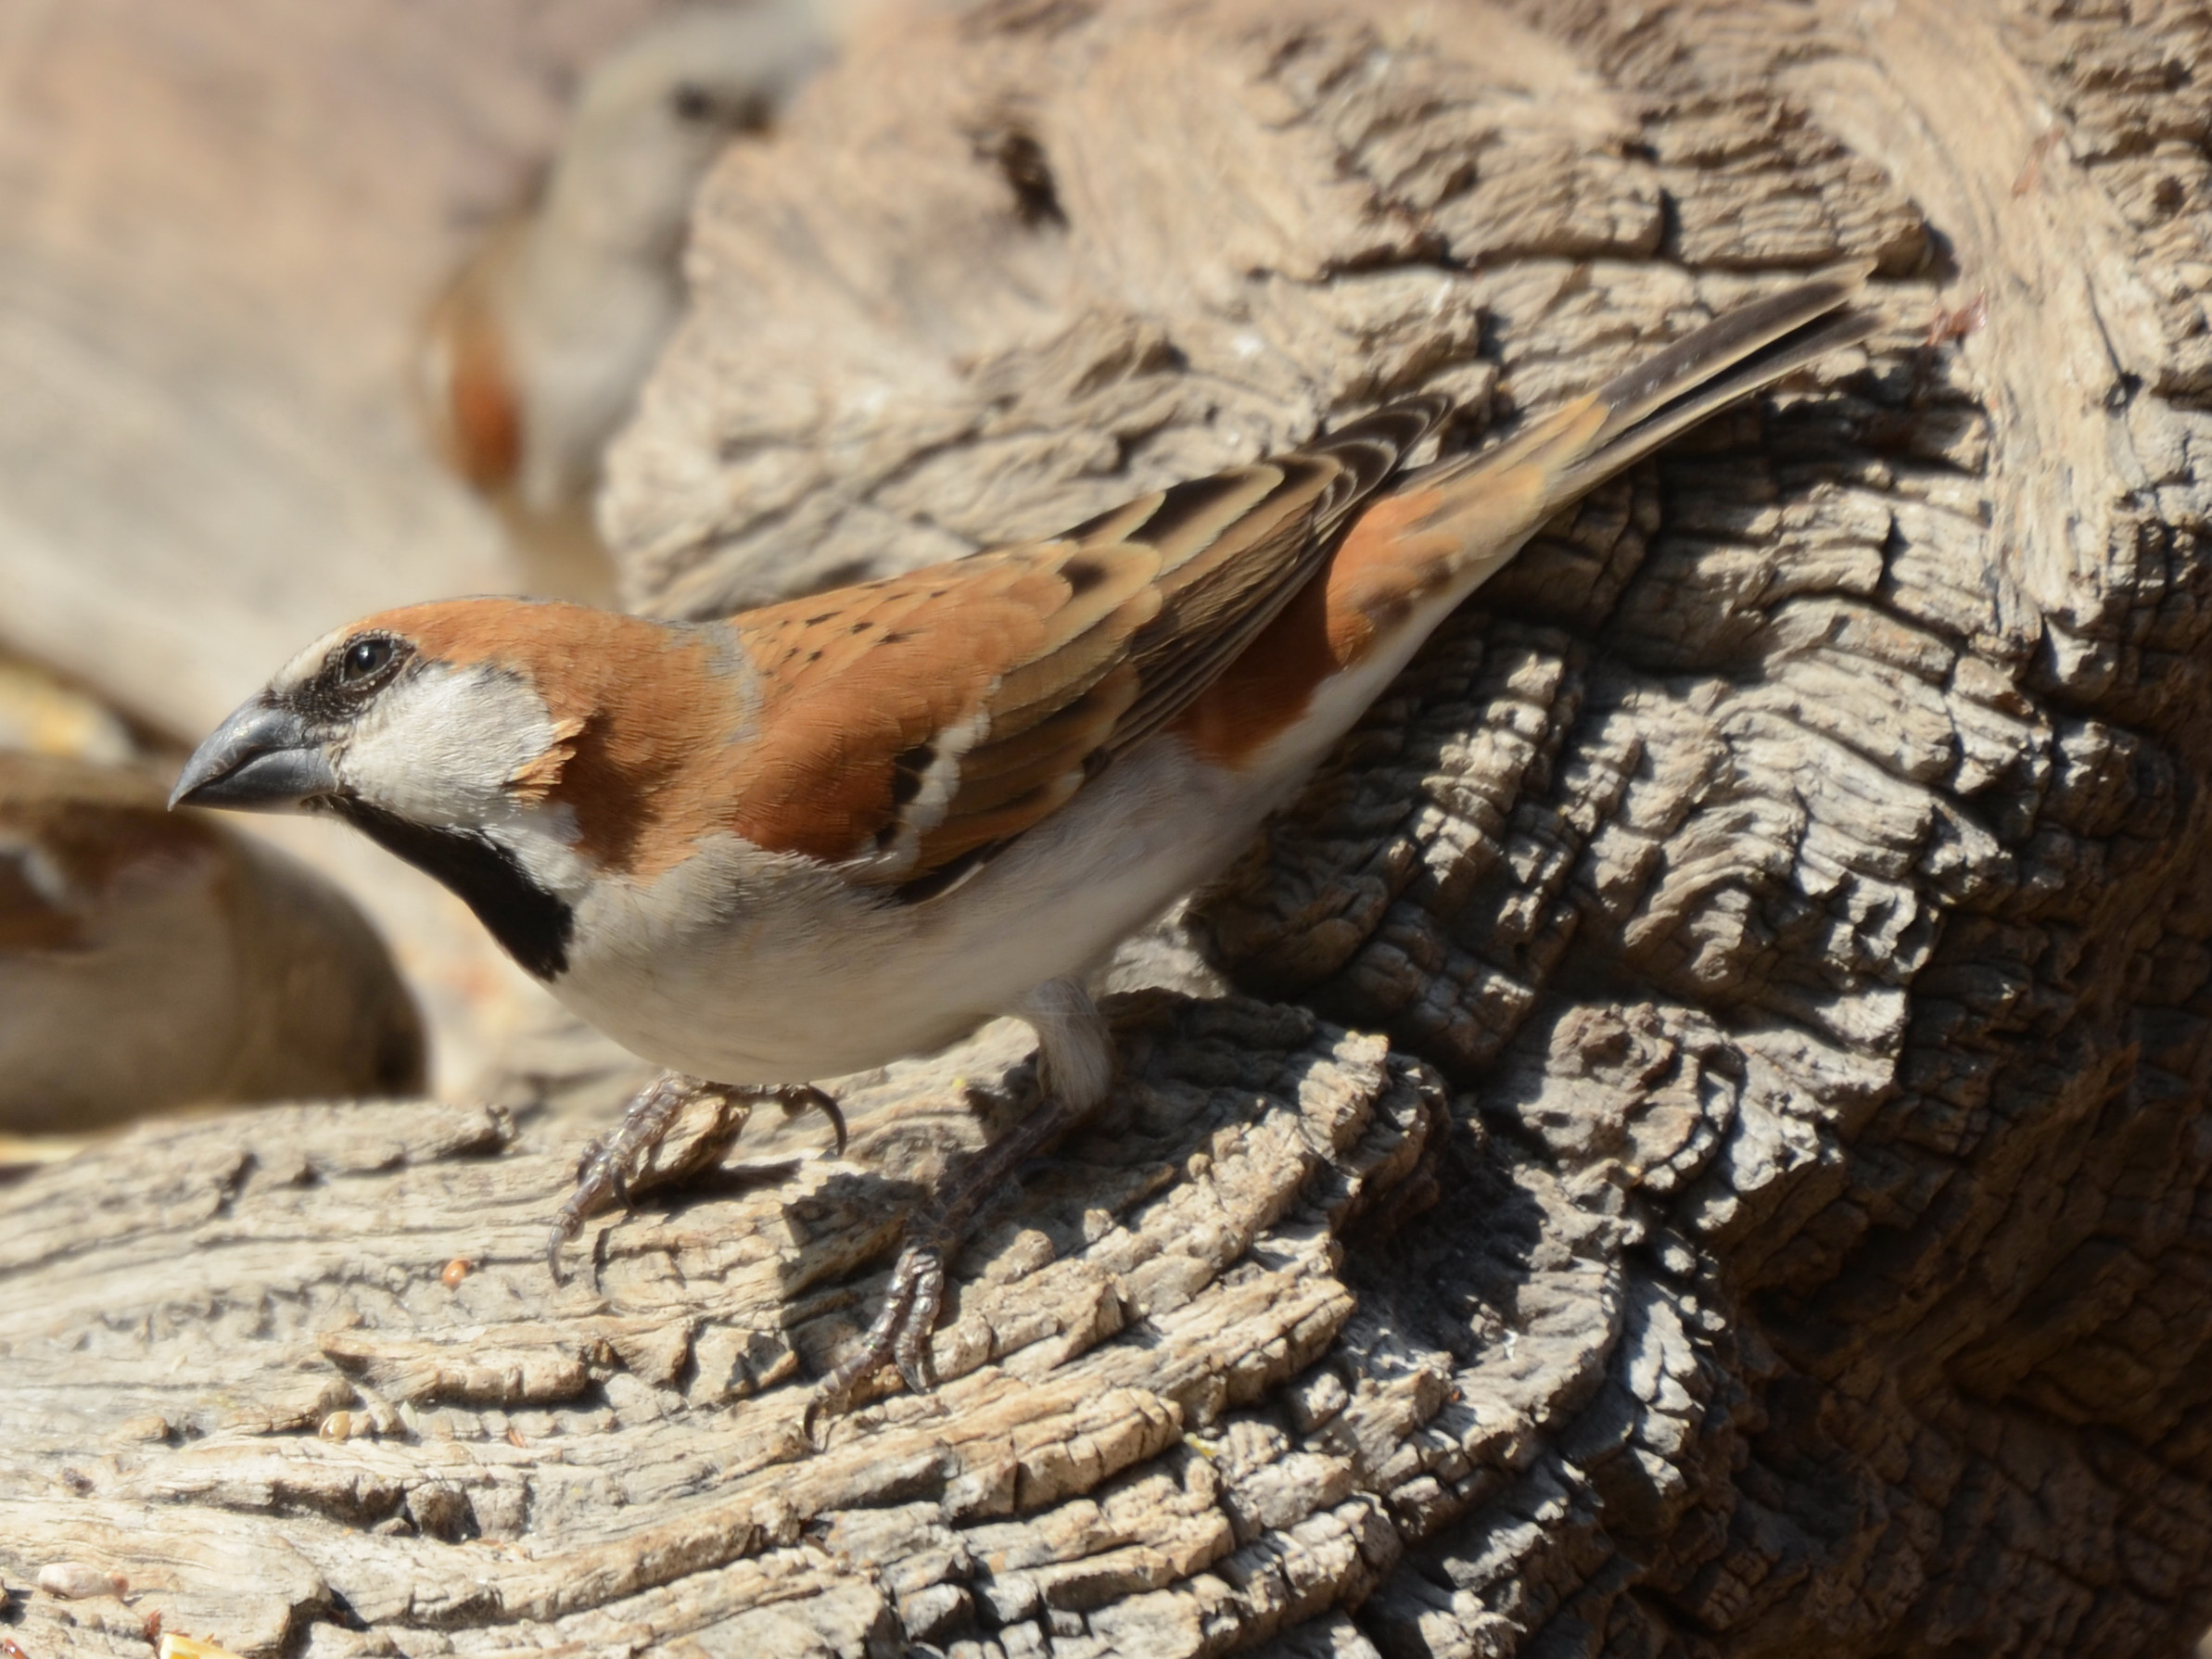 Click picture to see more Great Rufous Sparrows.